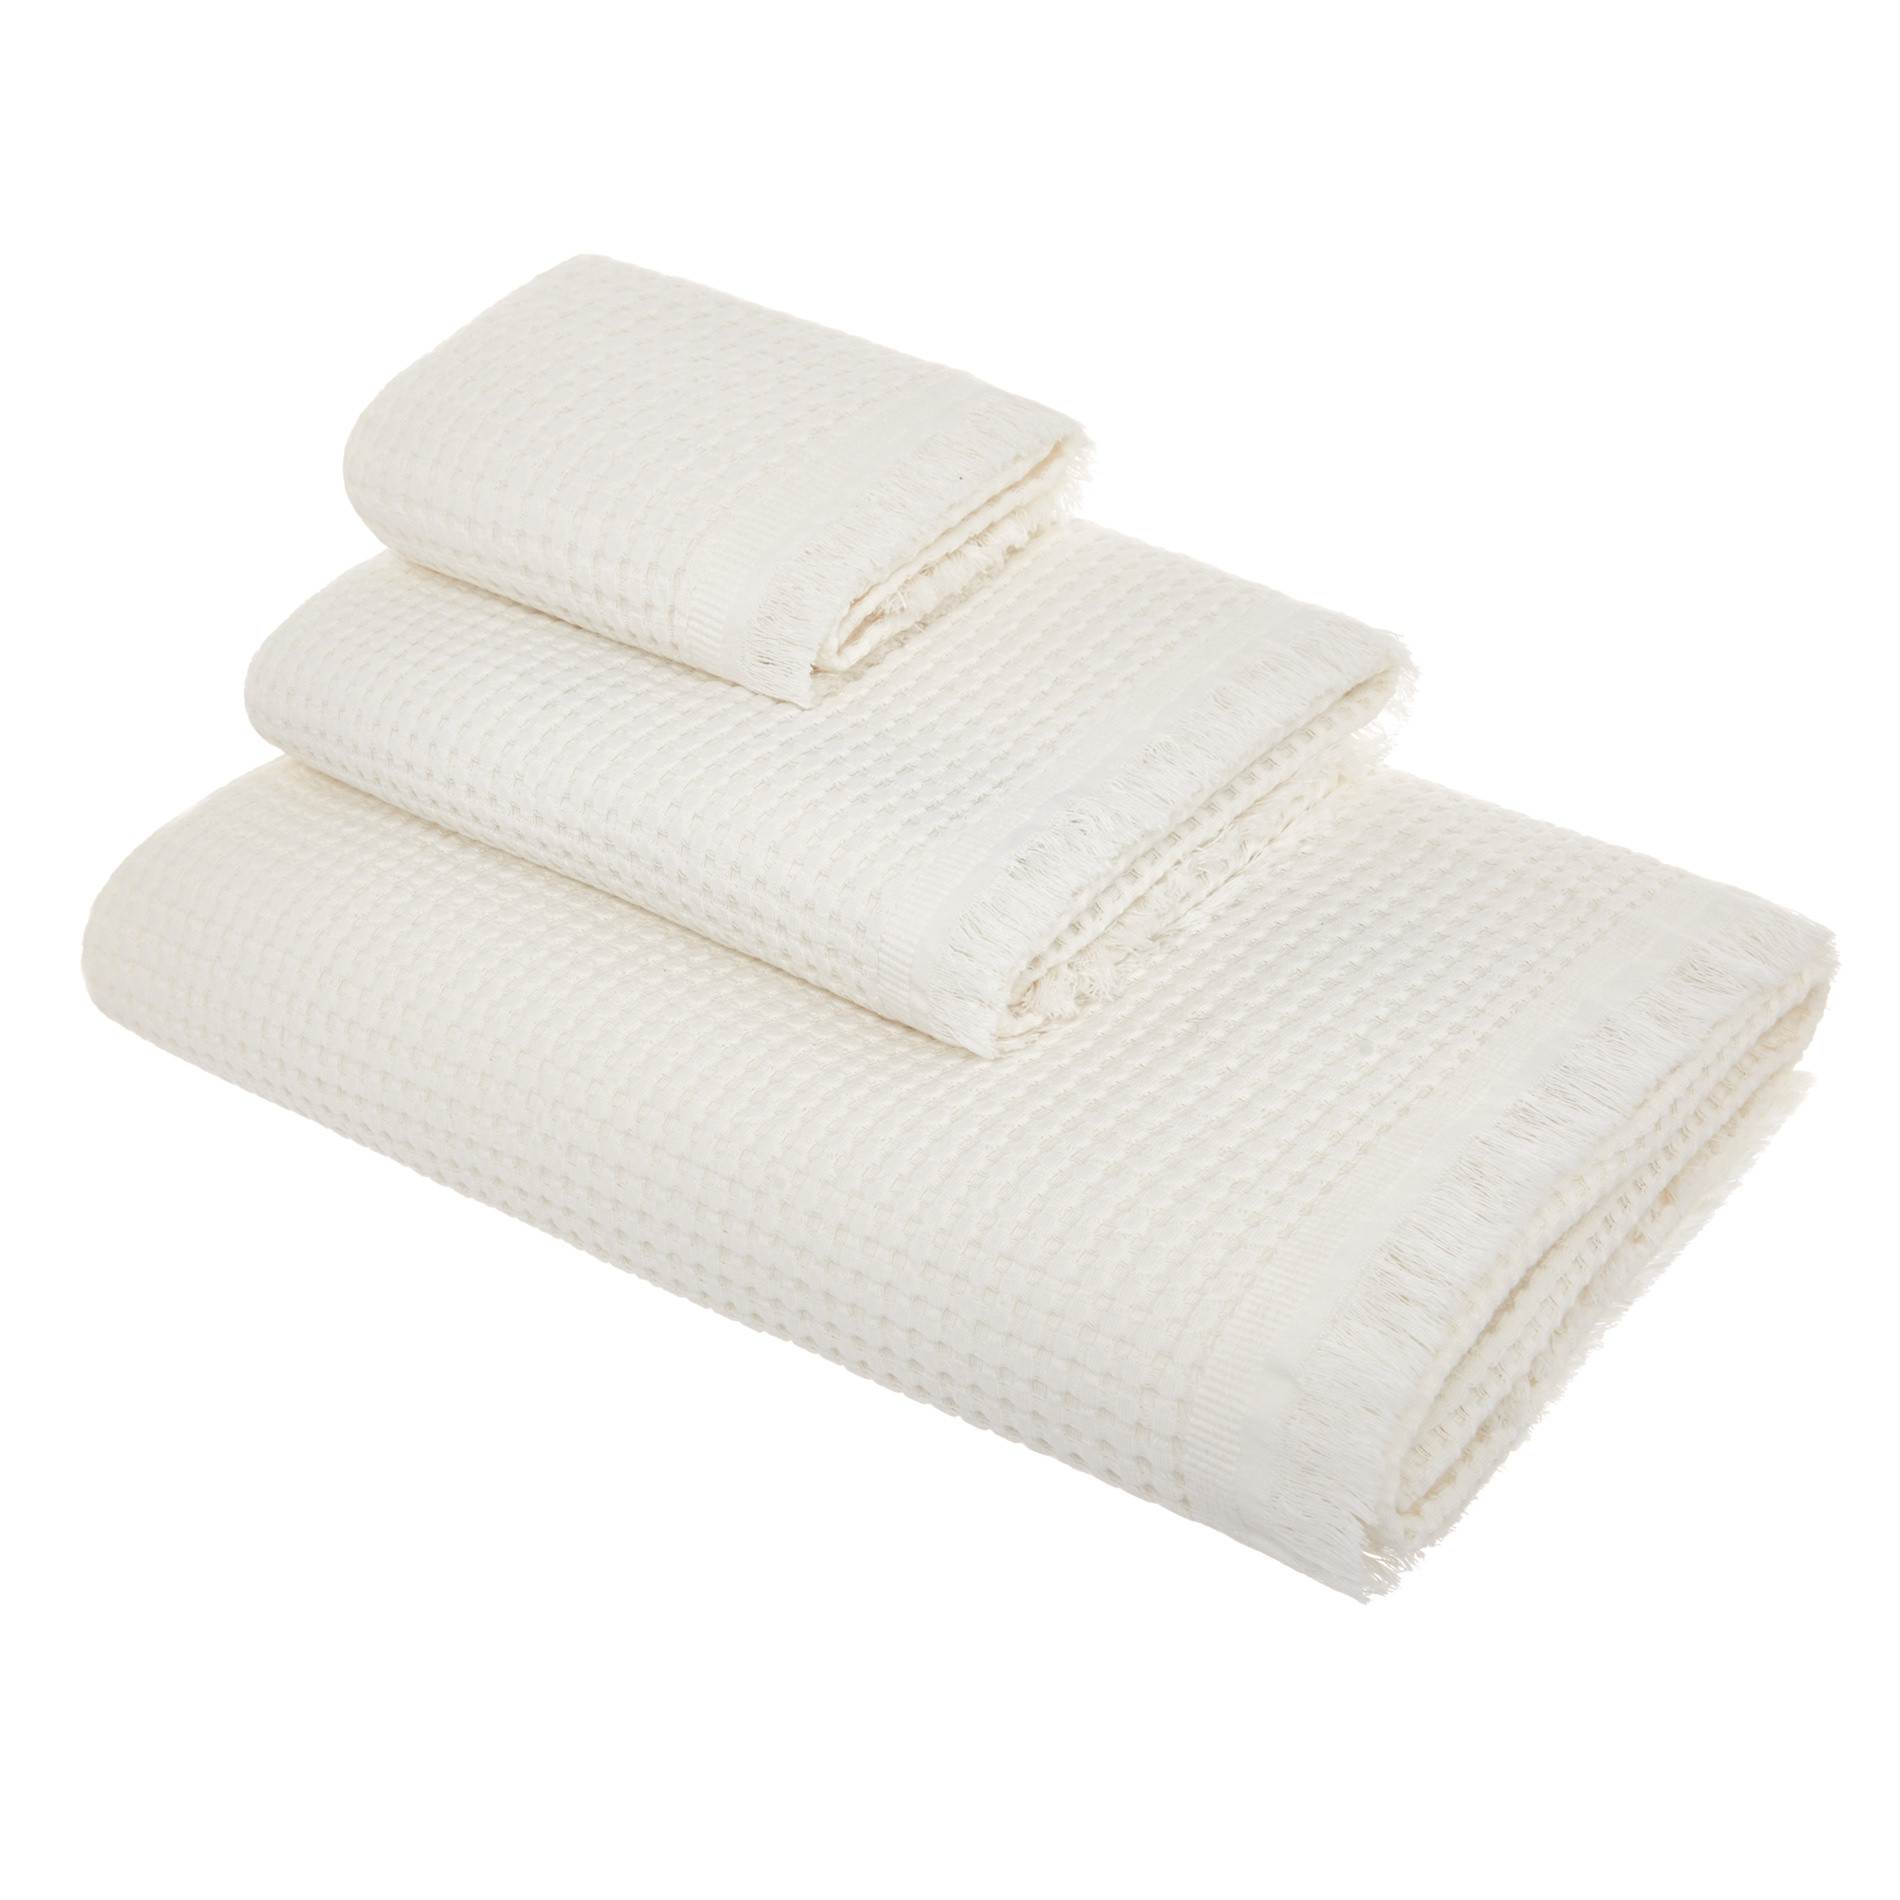 100% cotton honeycomb towel Thermae, White Cream, large image number 0